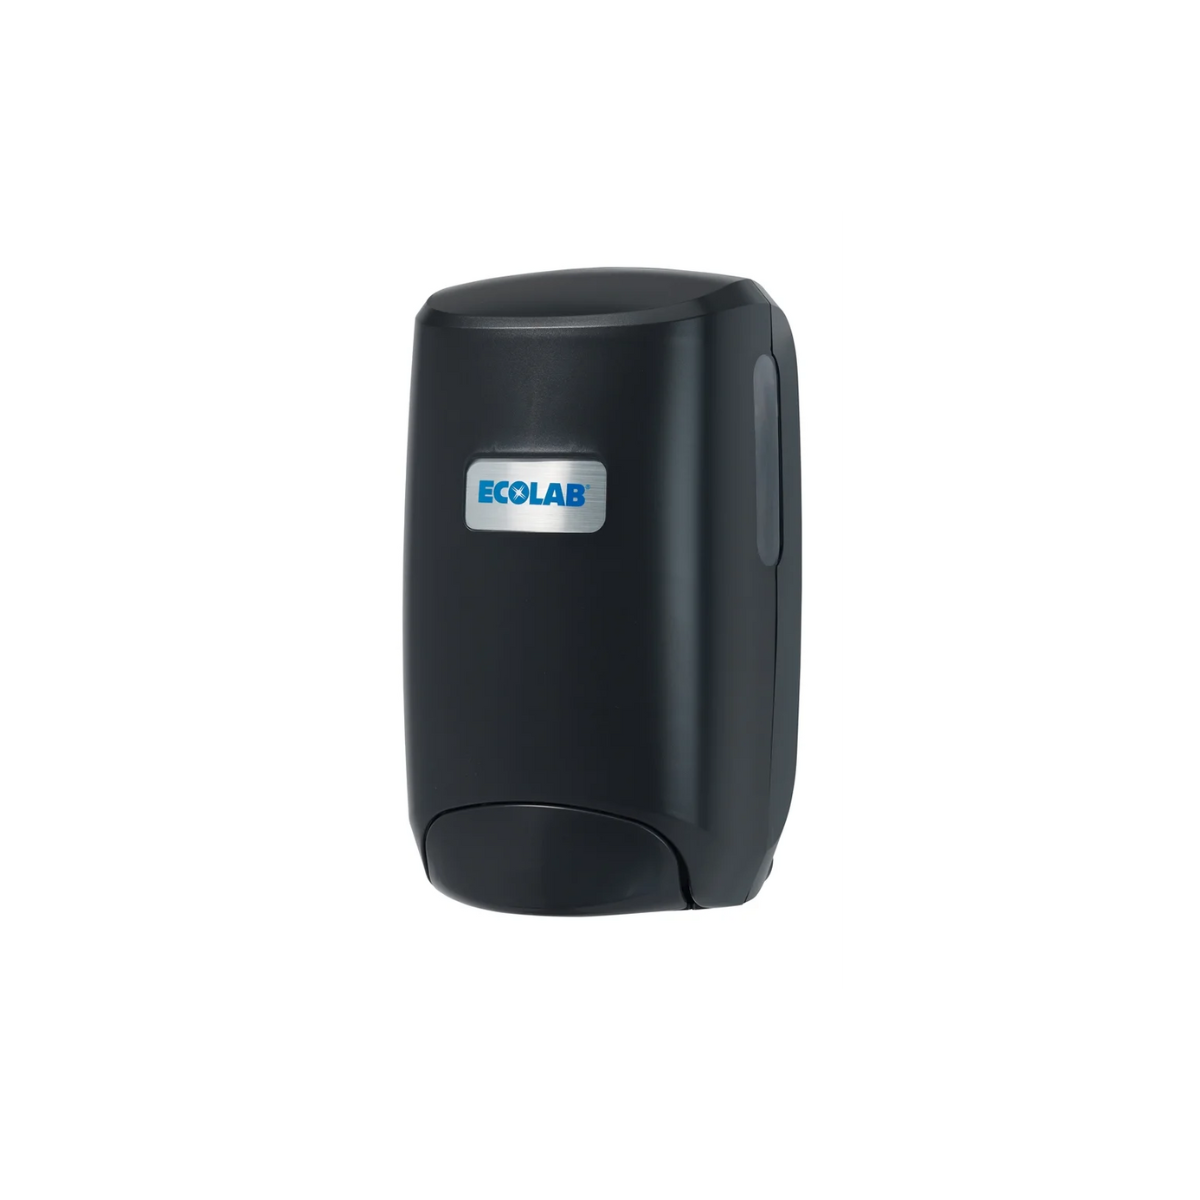 EcoLab Manual Hand Sanitizer Dispenser (Business Customers Only)